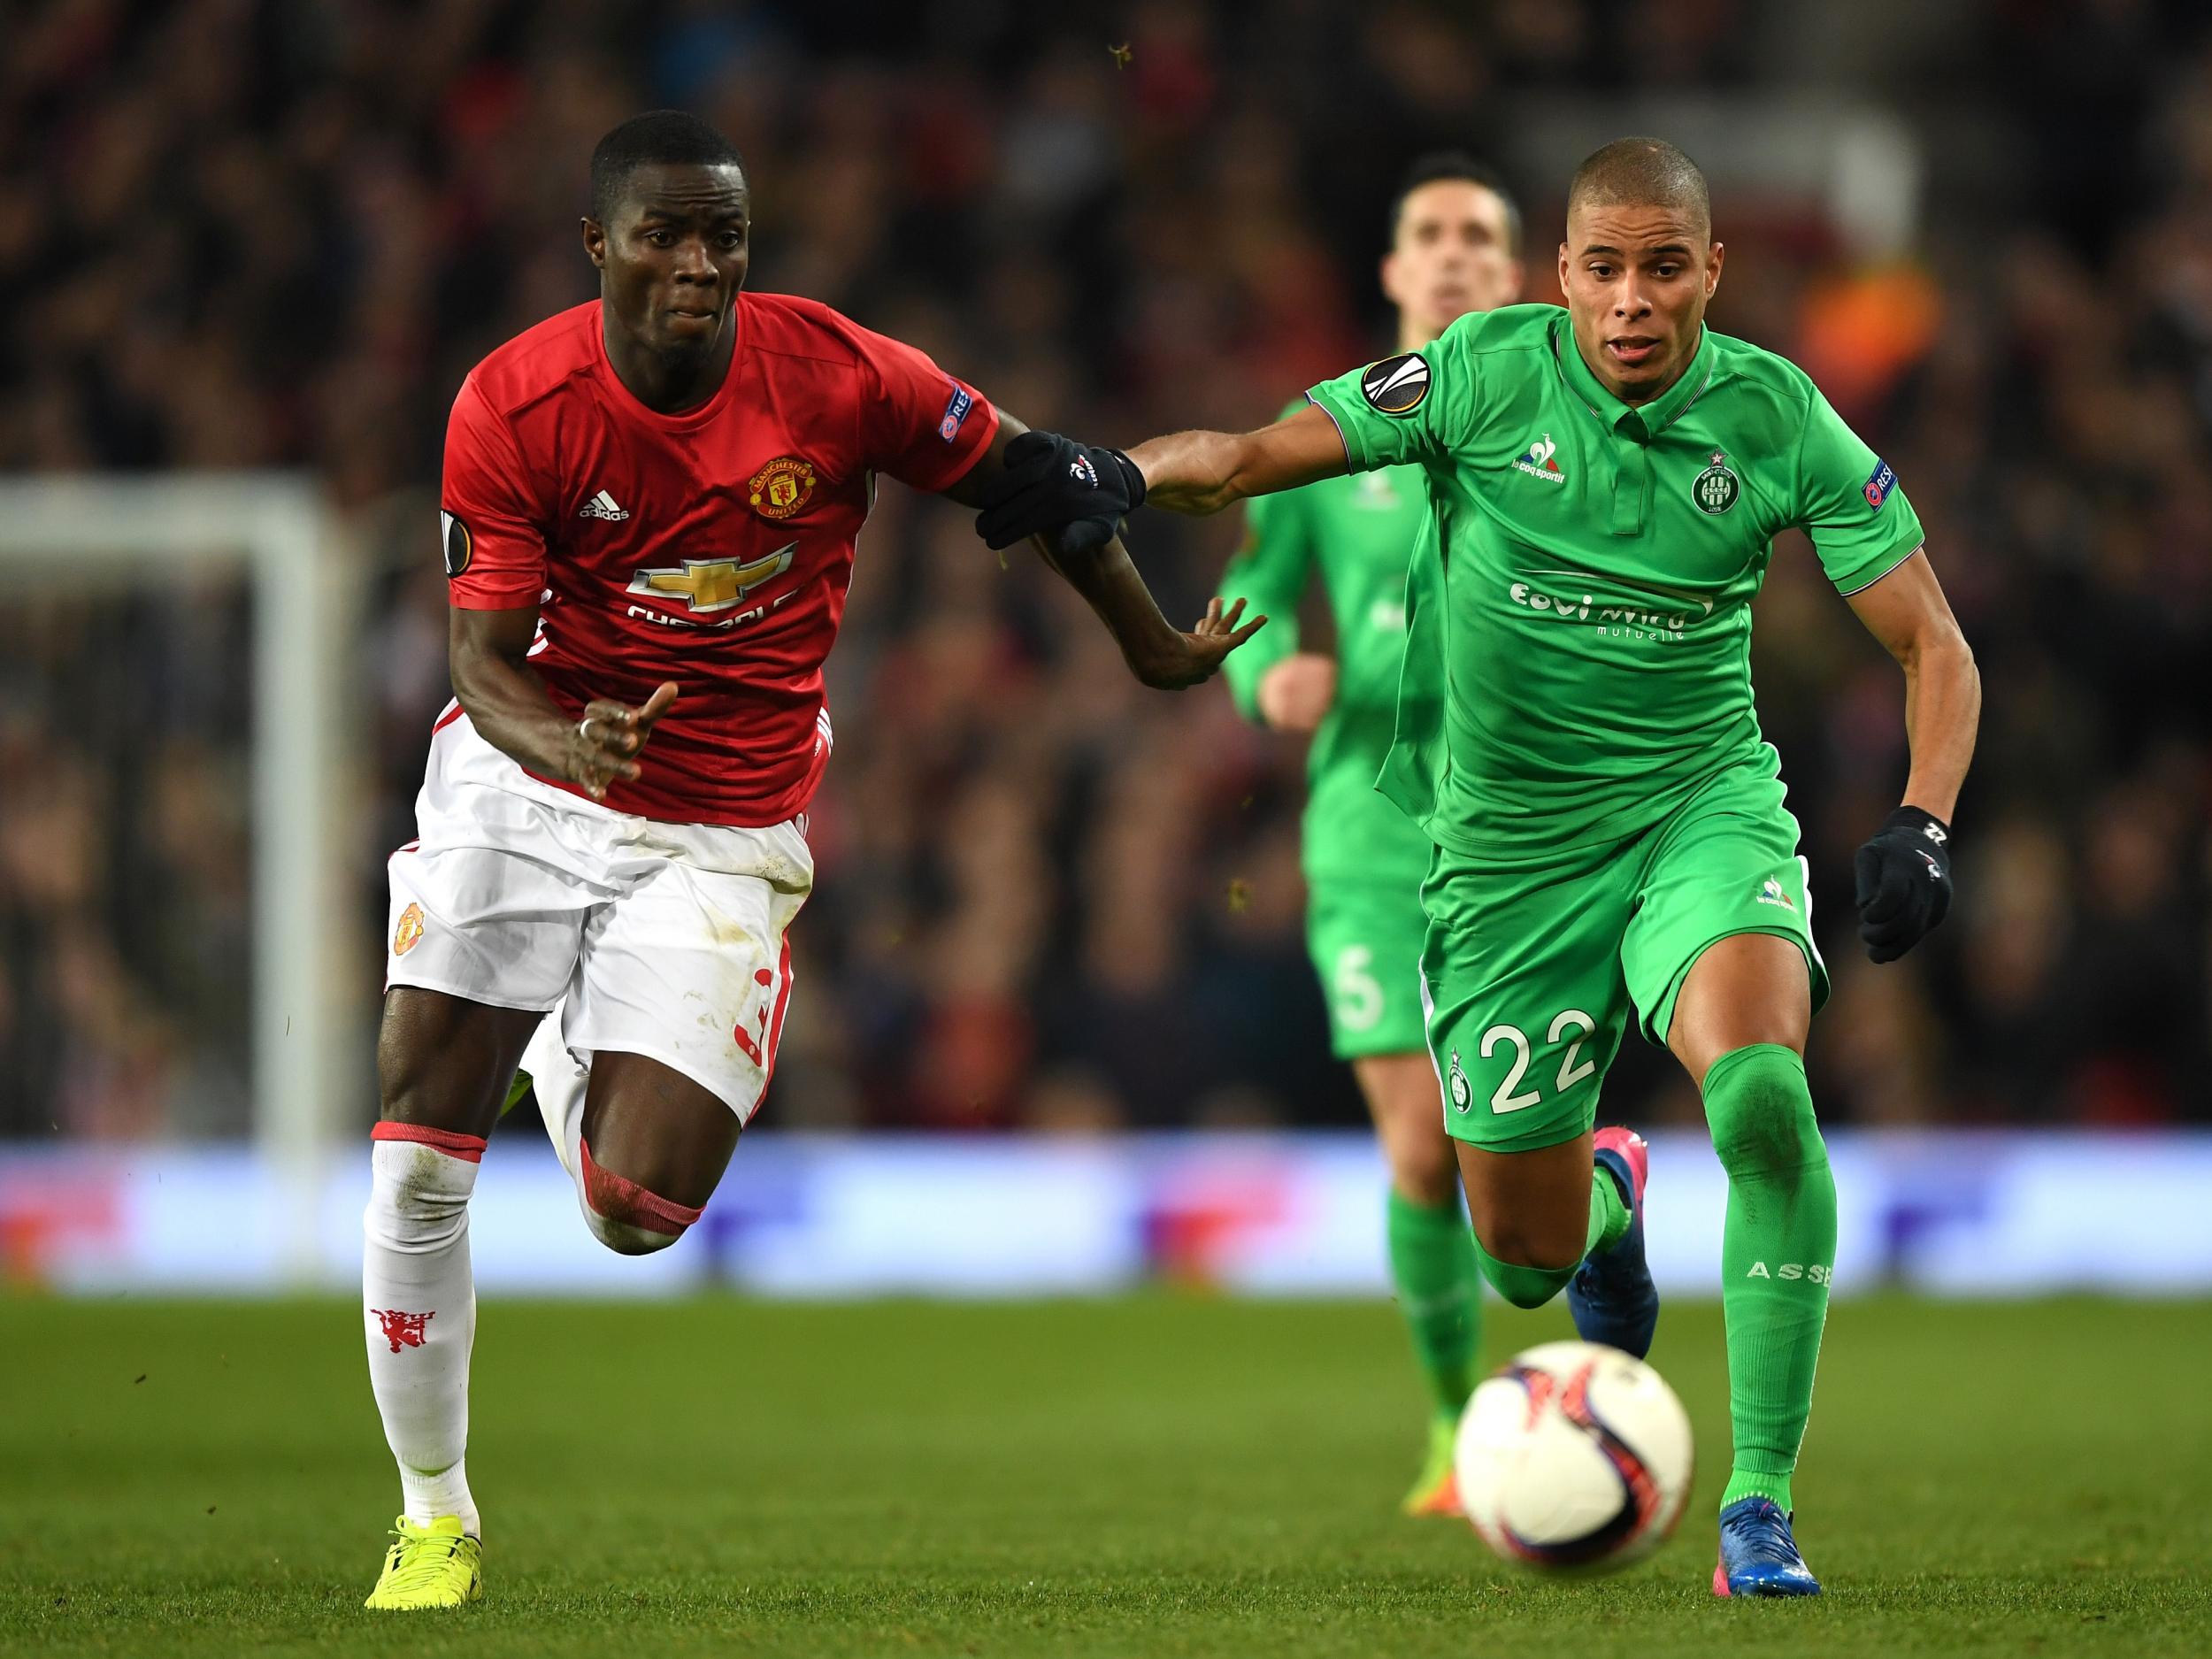 Eric Bailly made two mistakes early on for United